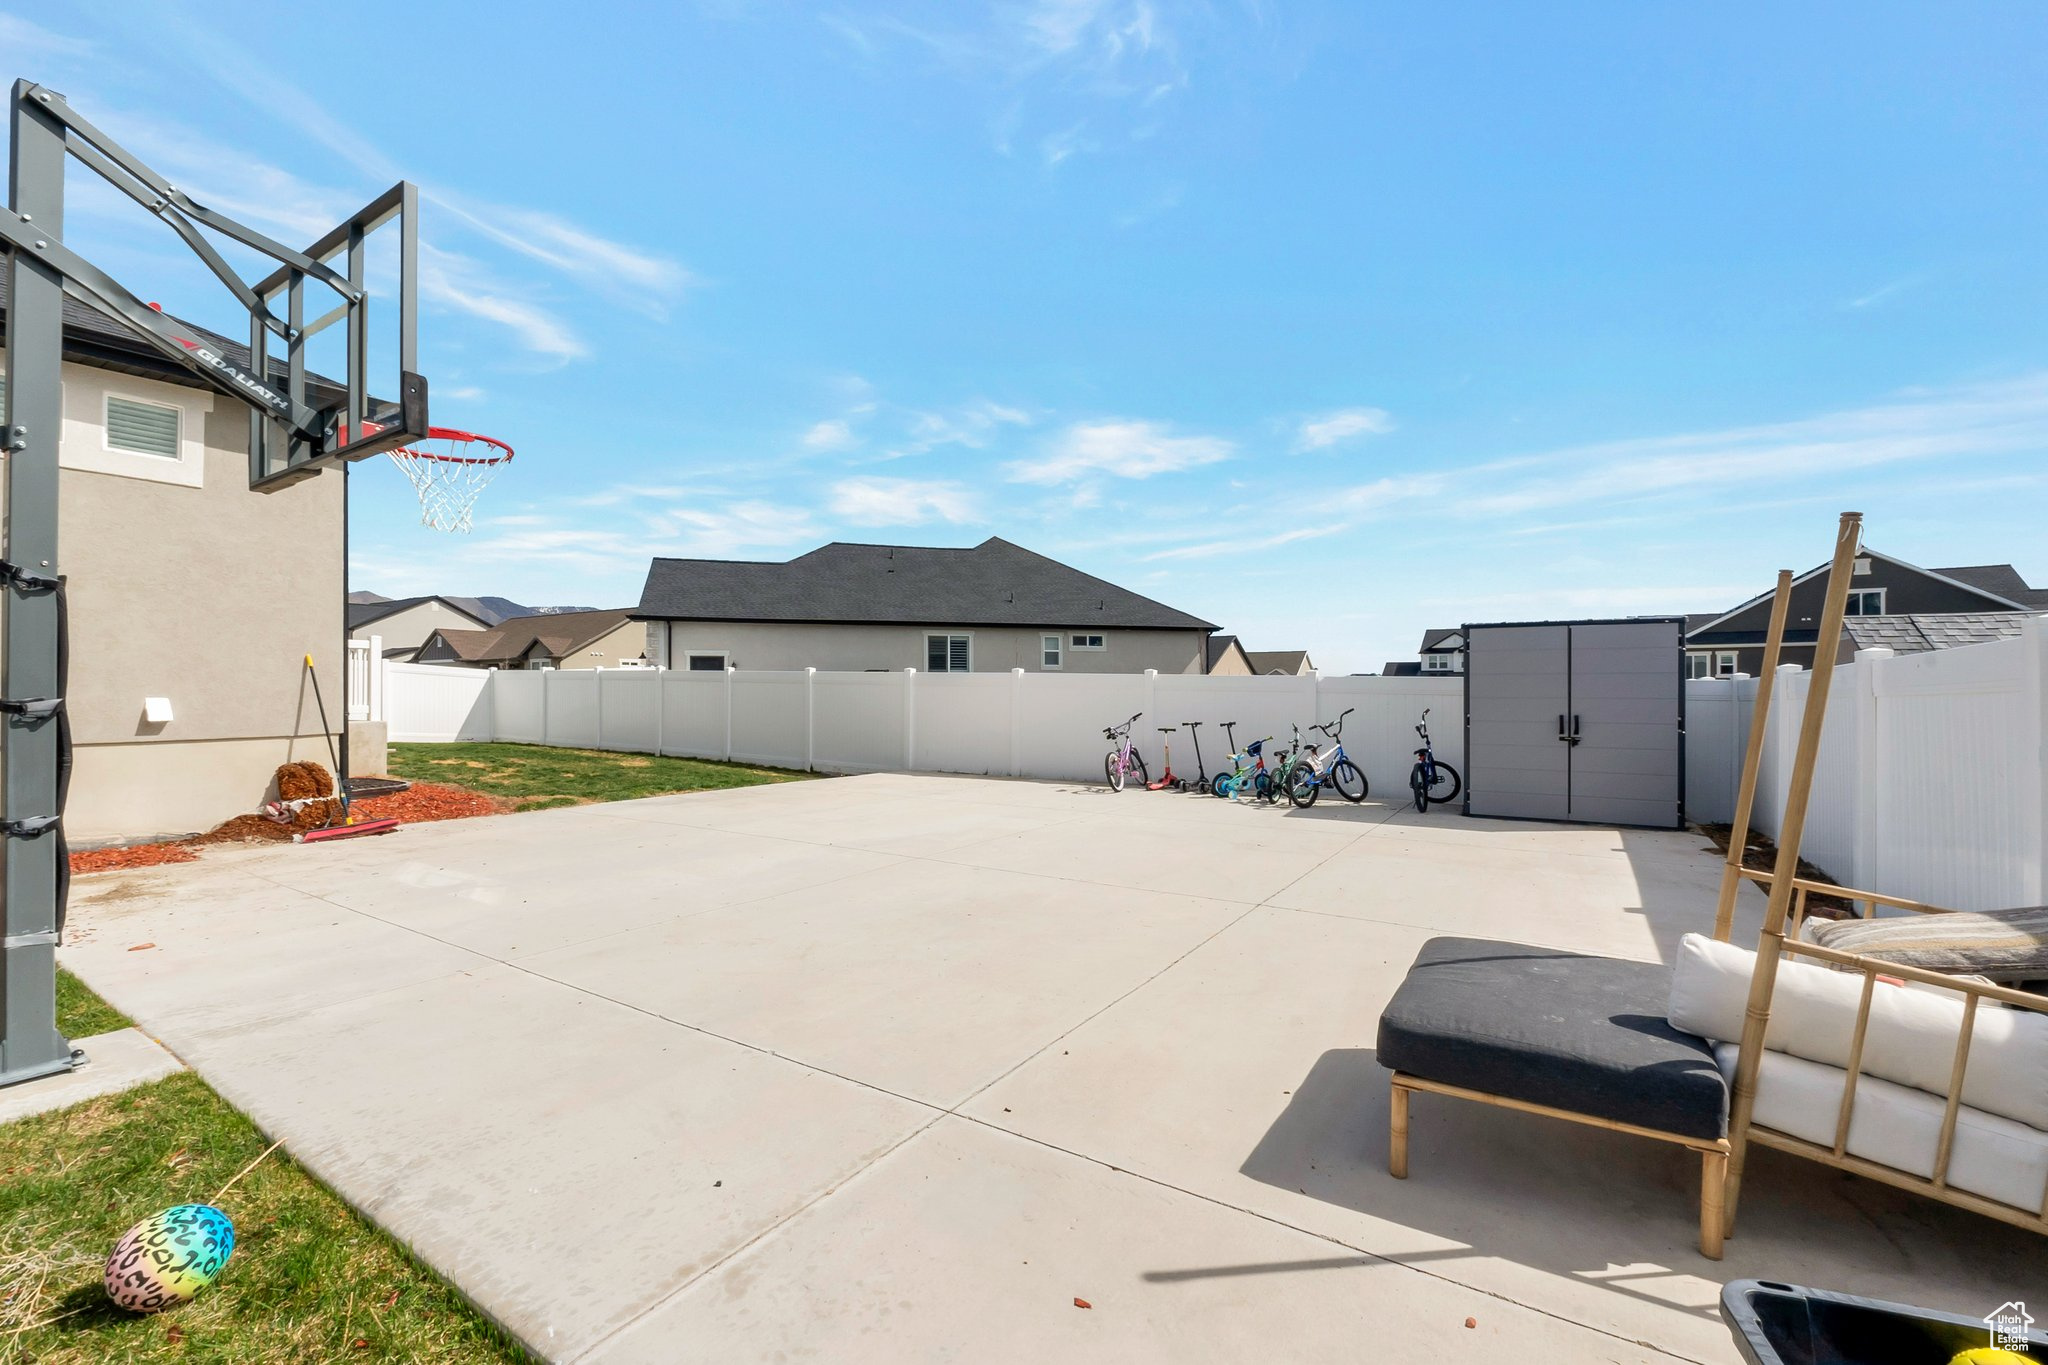 View of patio / terrace featuring basketball court and a shed